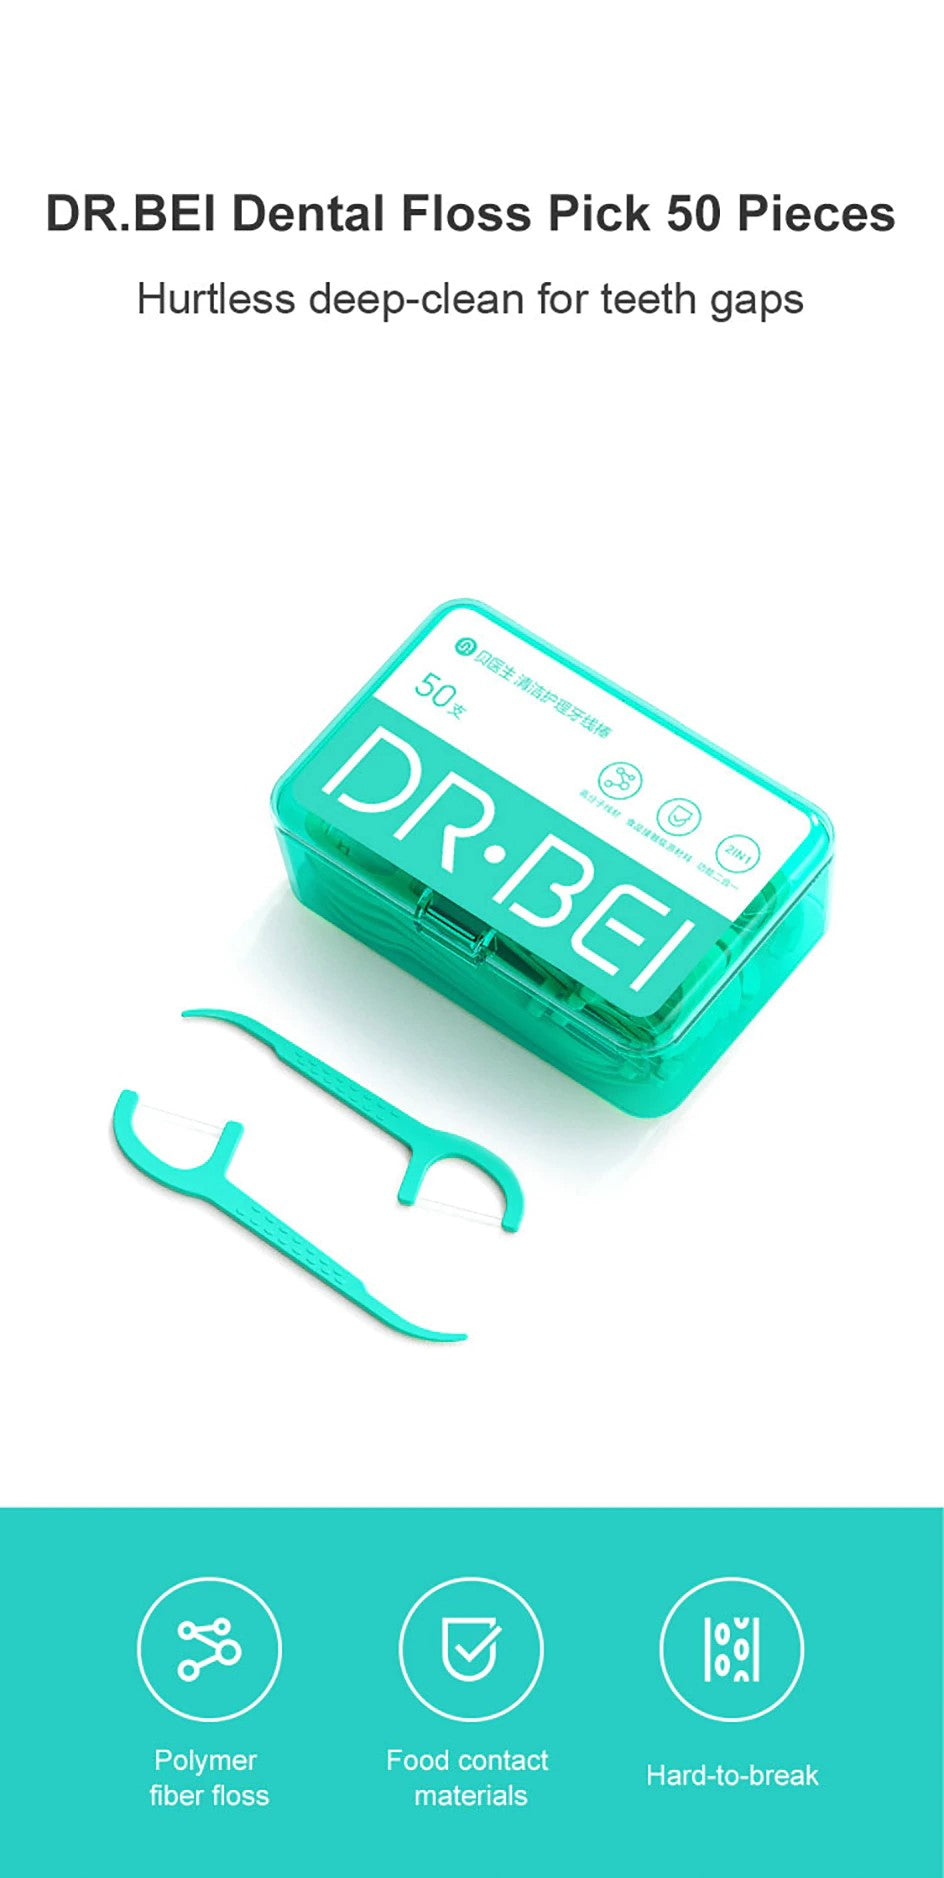 DR.BEI Dental Floss Pick, 50 Pieces Xiaomi Youpin DR.BEI Dental Floss Stick 50pcs/box Portable Picks Teeth Flosser Toothpicks Dental Oral Care Teeth Pick Hygiene Cleaning Tools